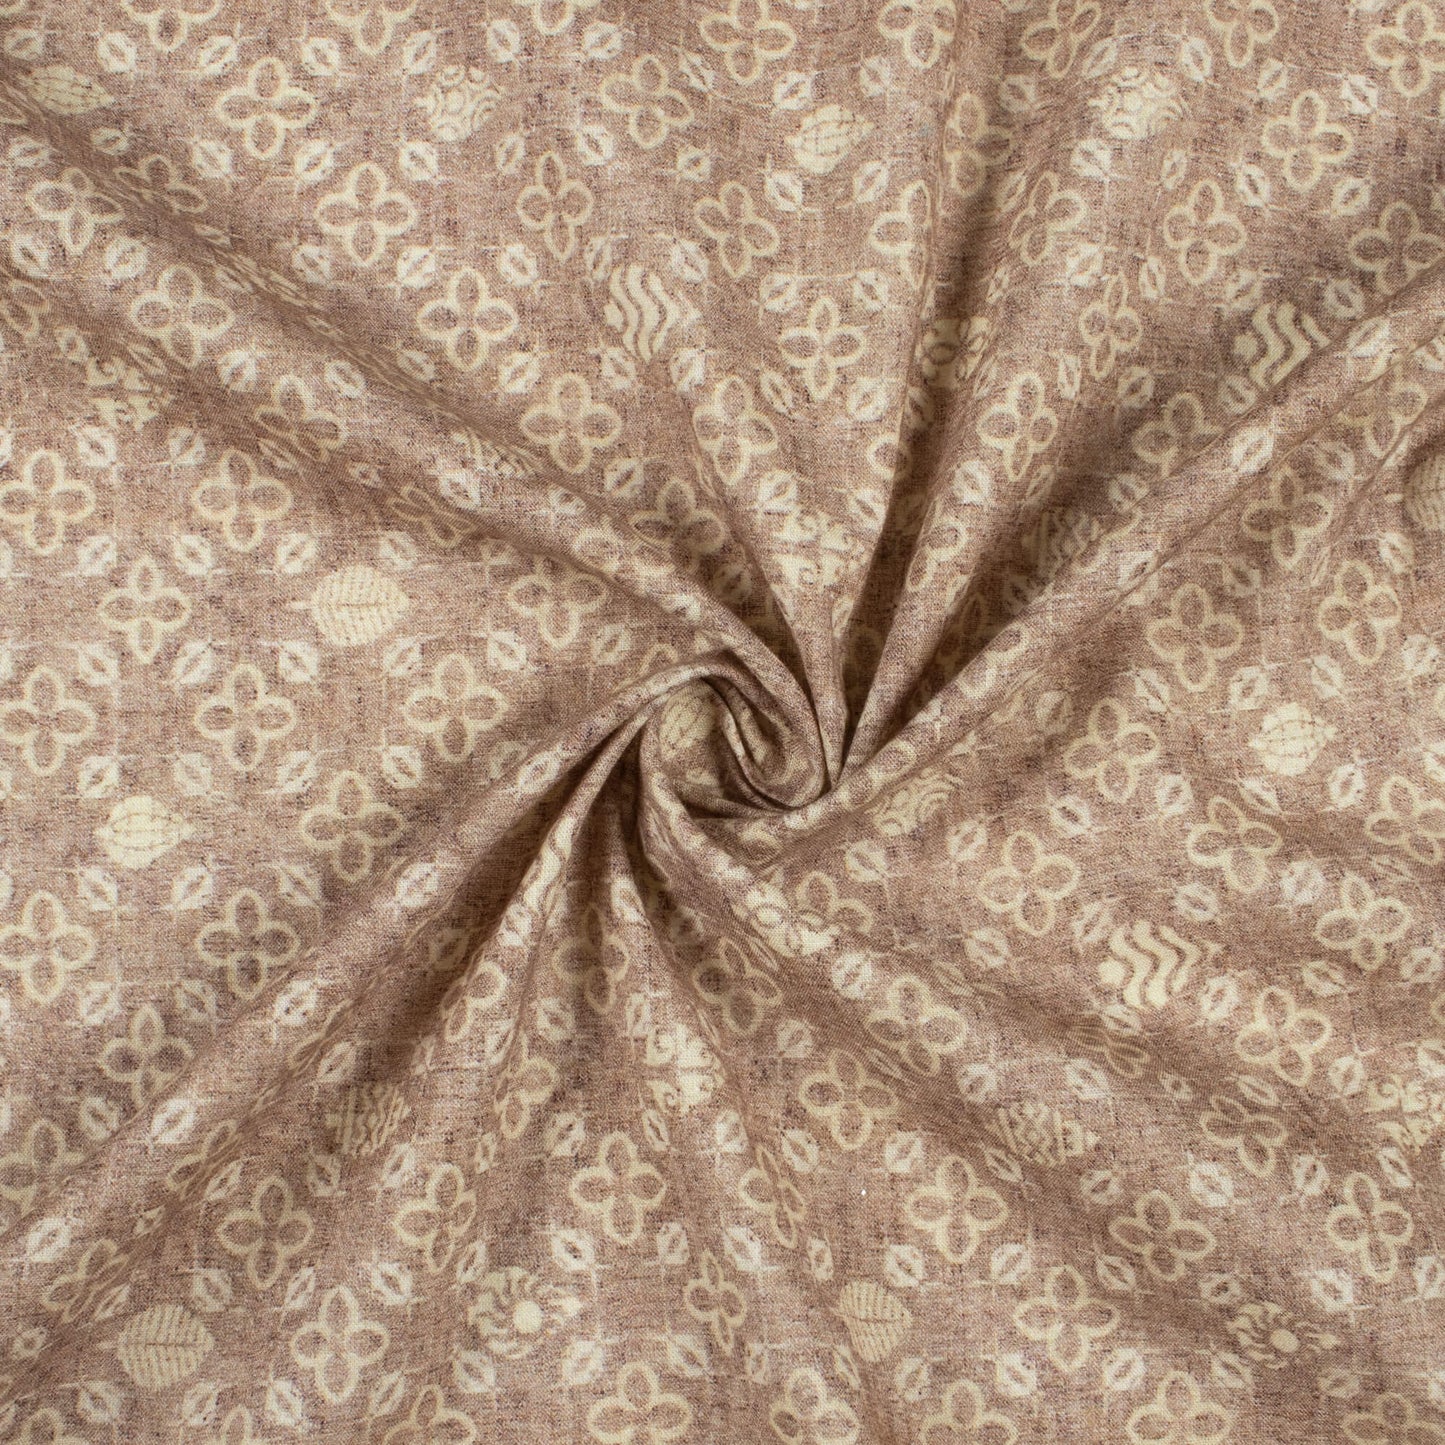 Sepia Brown And Beige Floral Digital Print Cotton Cambric Fabric